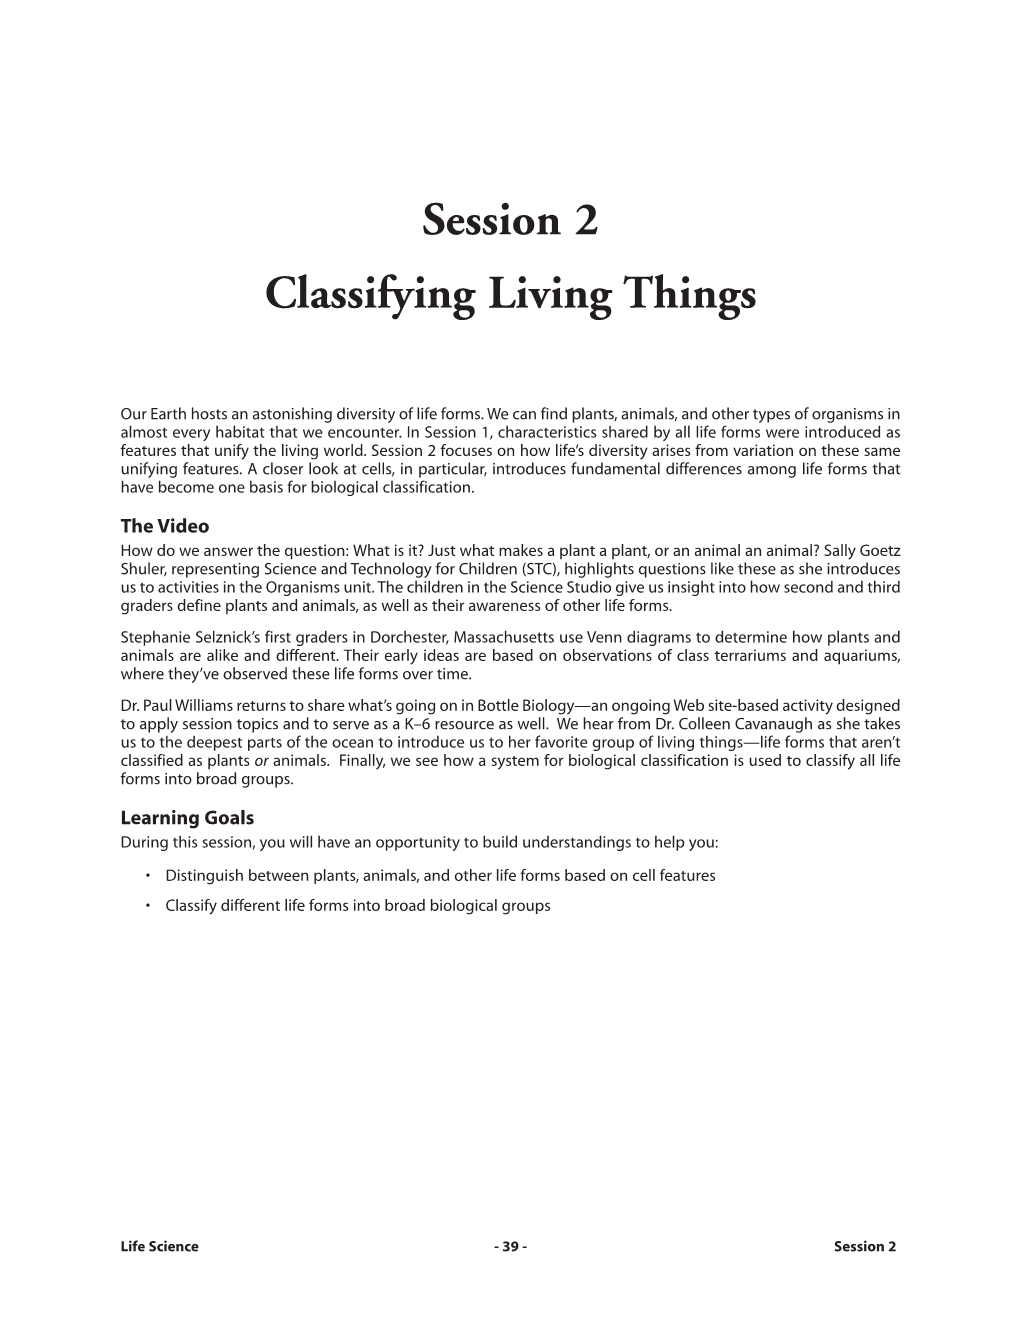 Session 2 Classifying Living Things